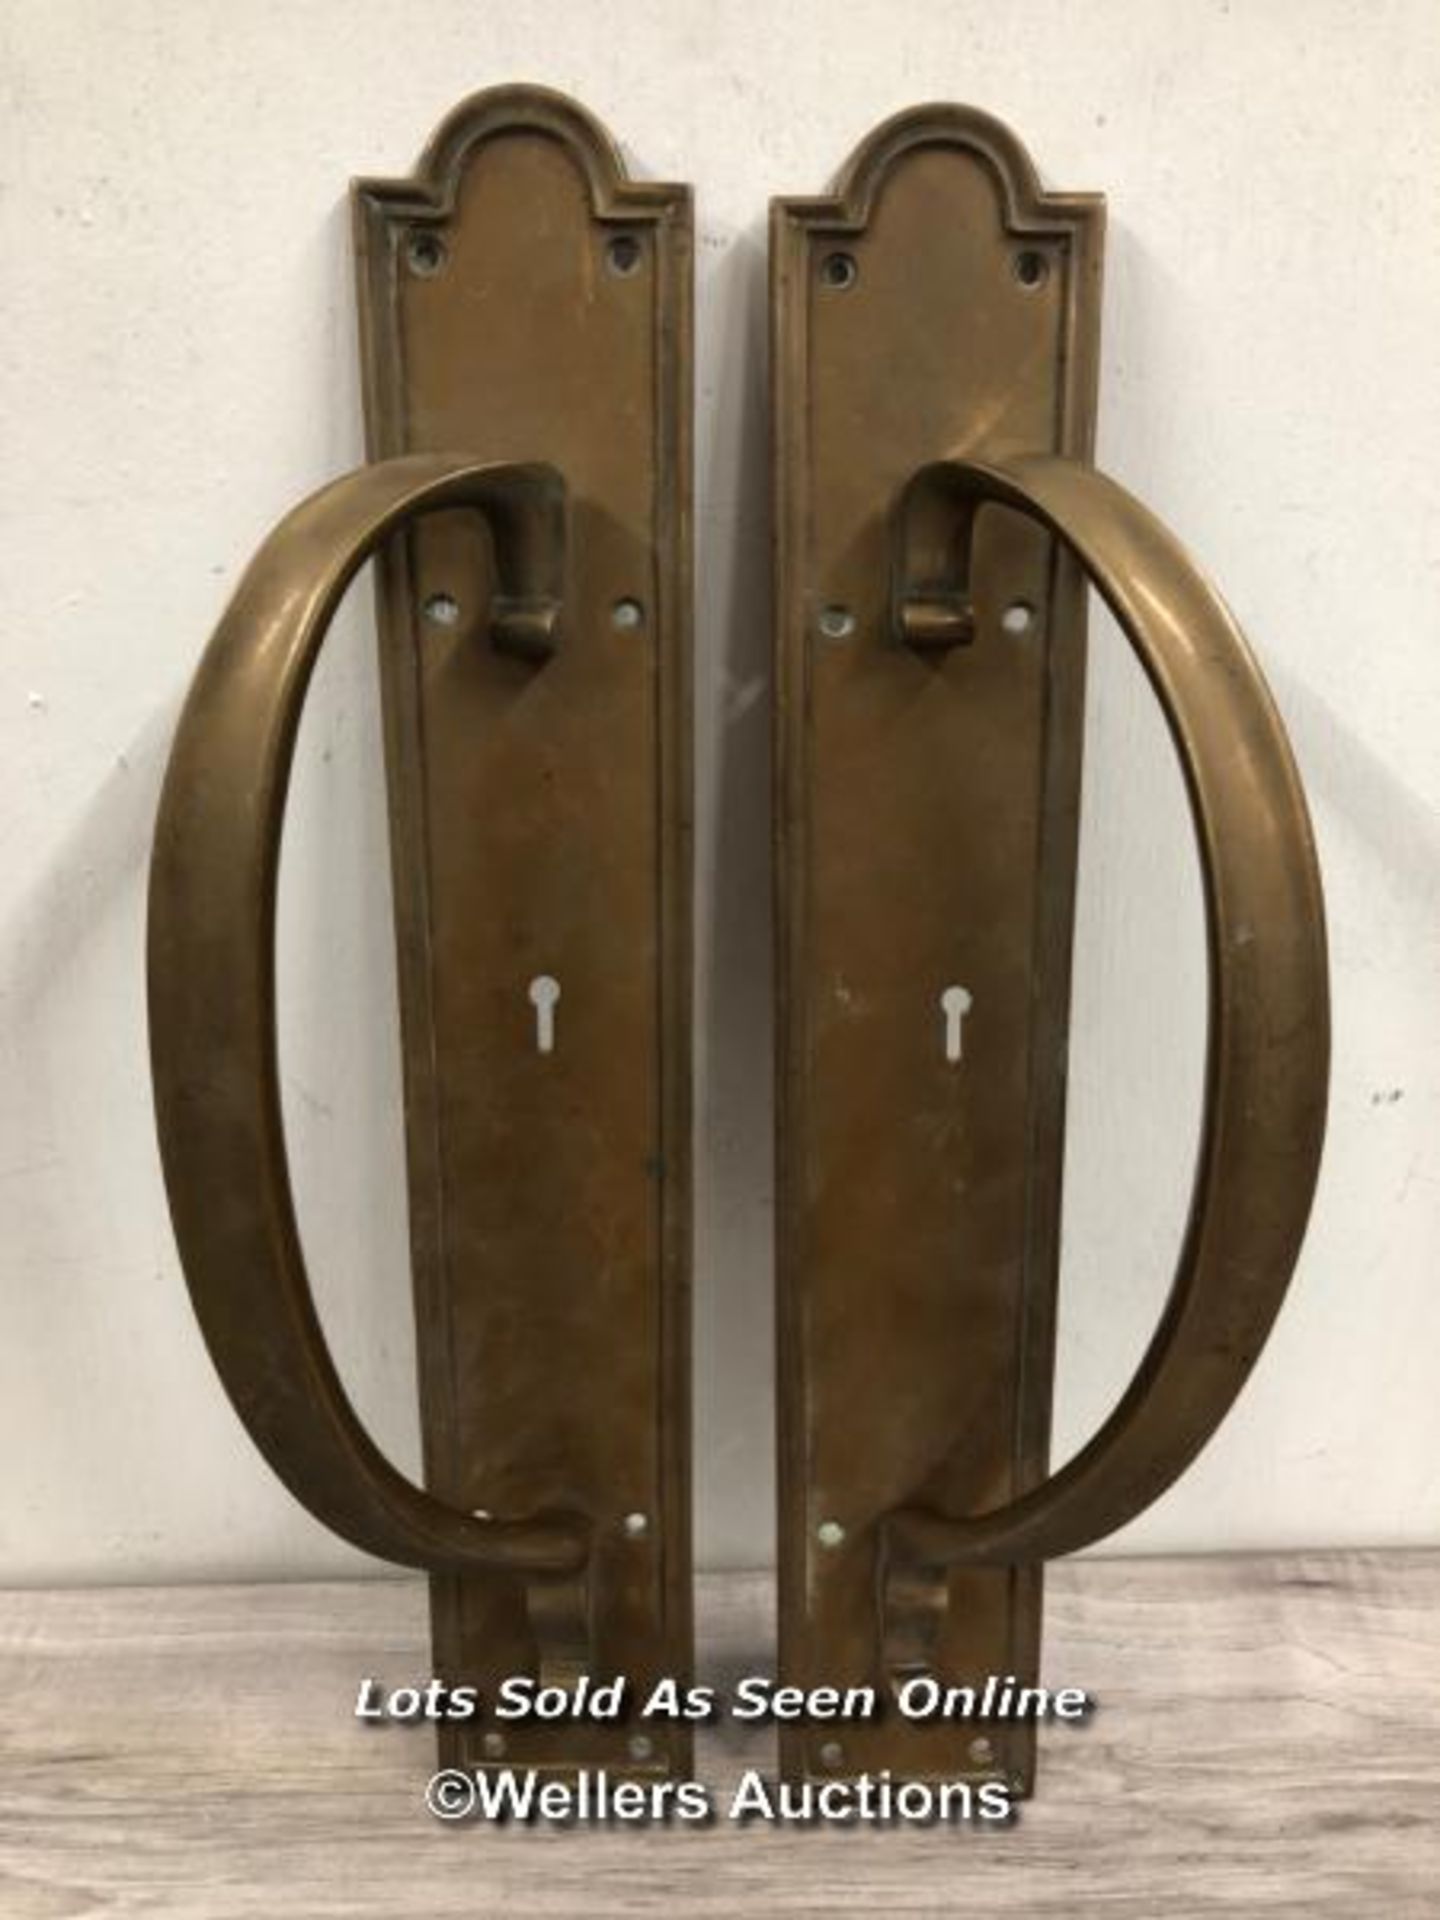 *MATCHING PAIR OF BRASS PULL HANDLES WITH KEY HOLE INSERTS, MOUNTED AGAINST BACK PLATE WITH RAISED